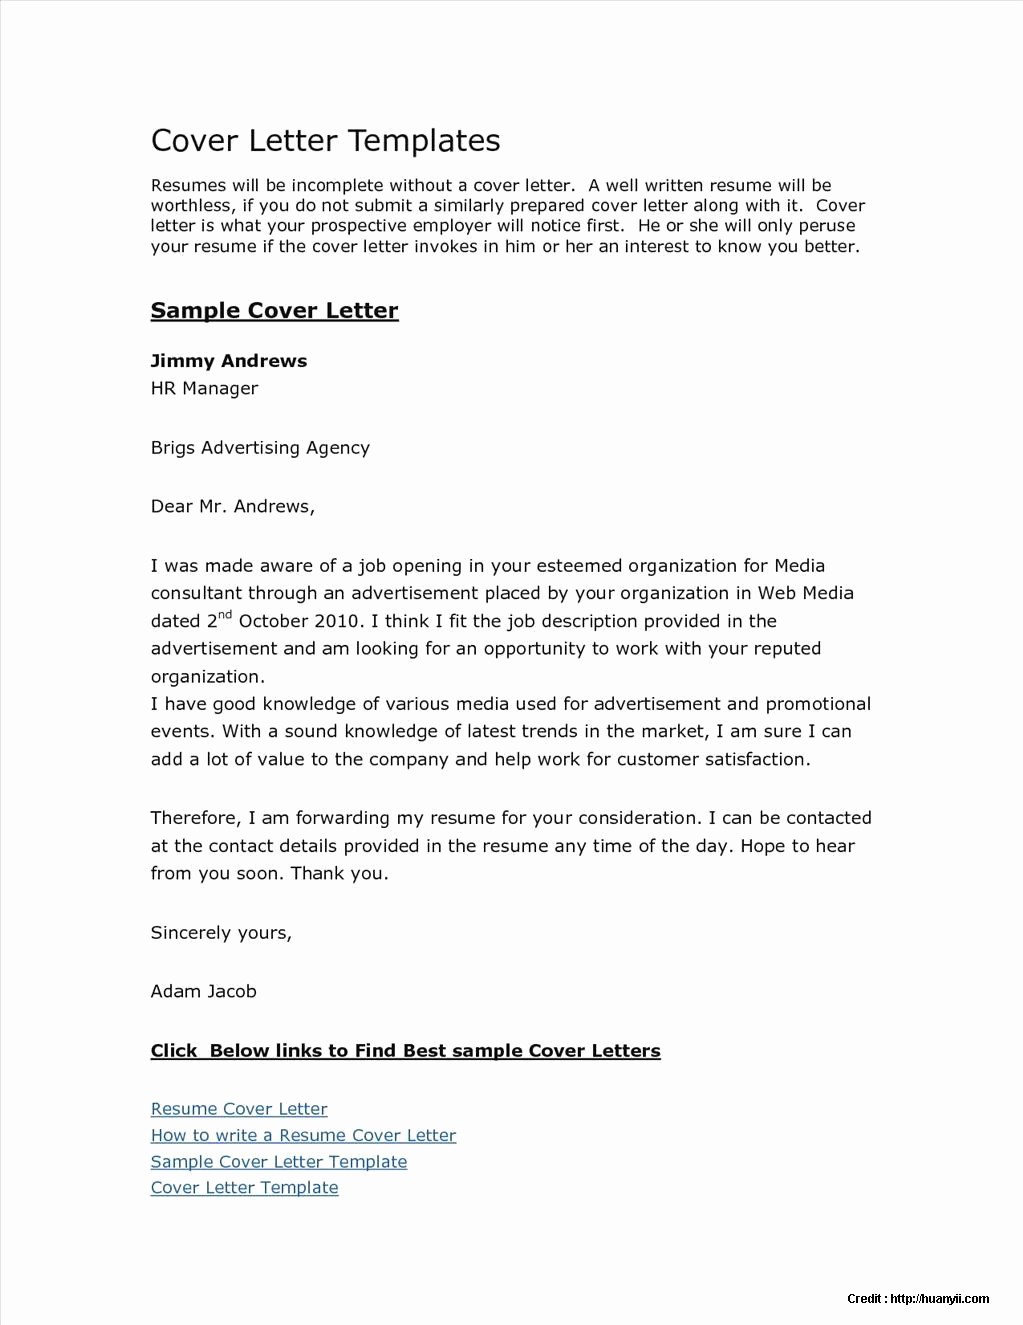 Free Resume Cover Letter Template New Free Cover Letter Templates Microsoft Download Cover